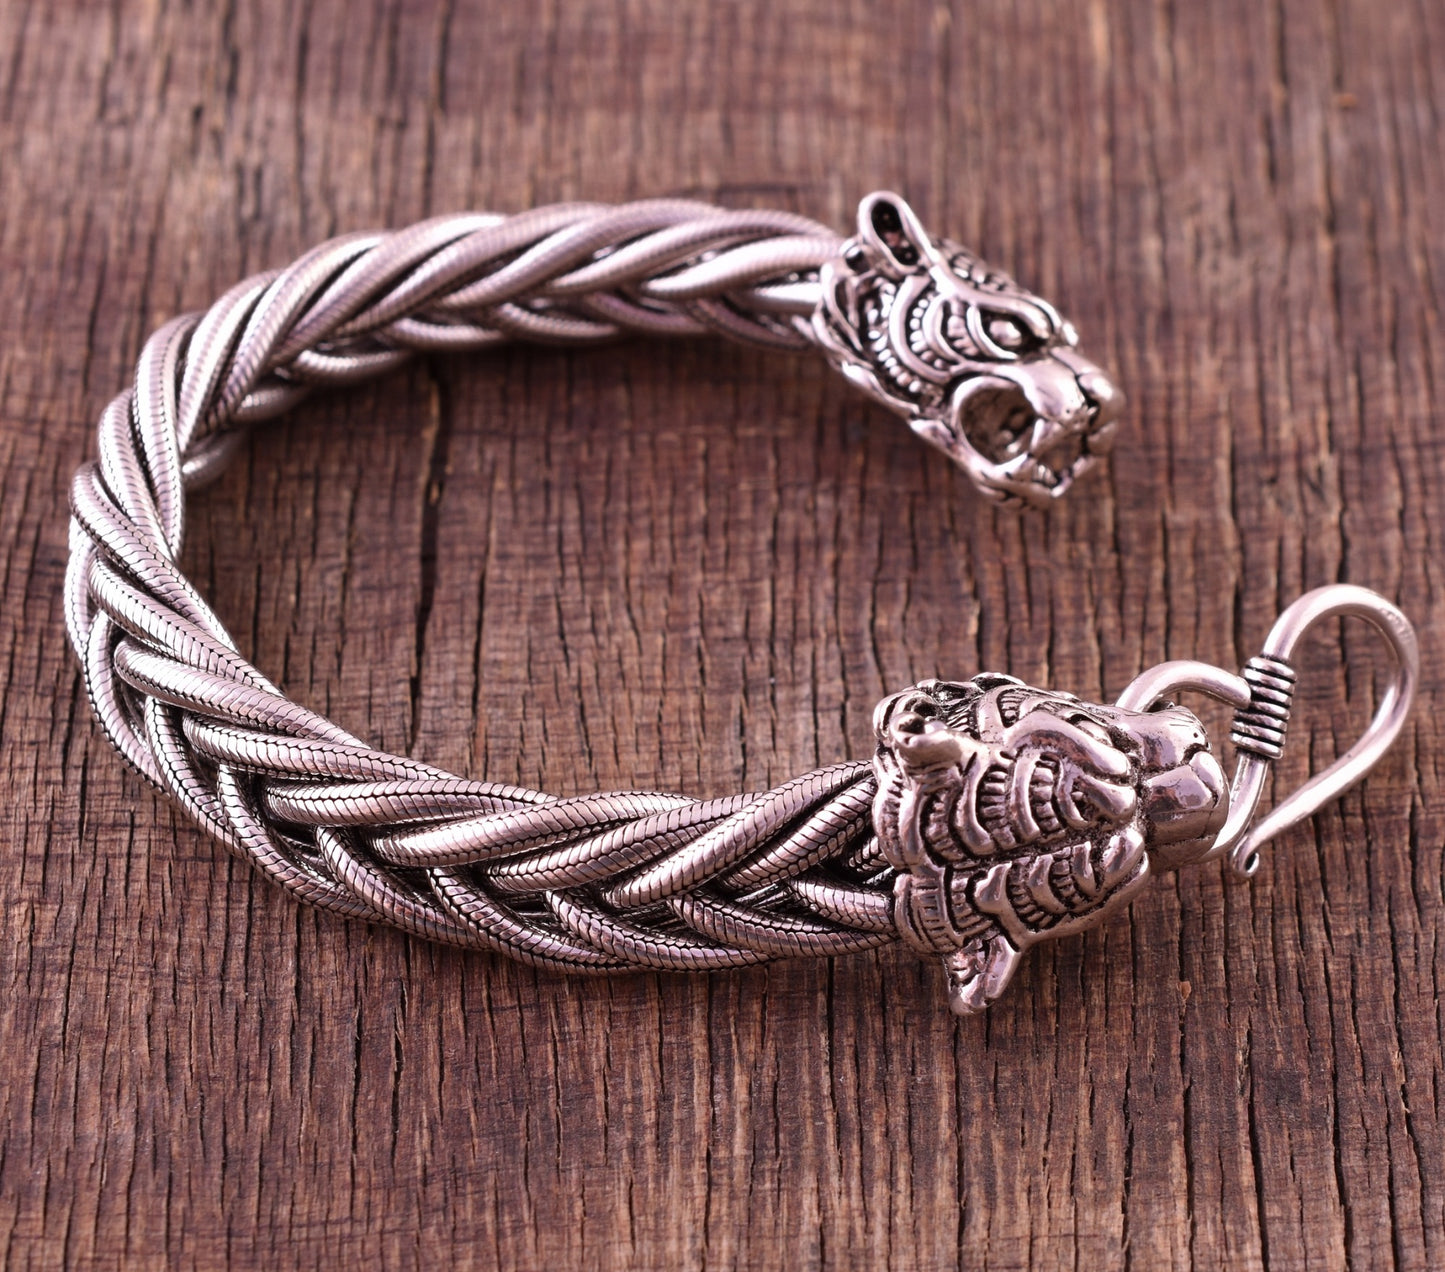 Solid 925 Sterling Silver Tiger Bracelet - Stylish Sterling Silver Oxidized Mens Bracelet - Length 9.5 Inches - Braided Thick Chain Bracelet